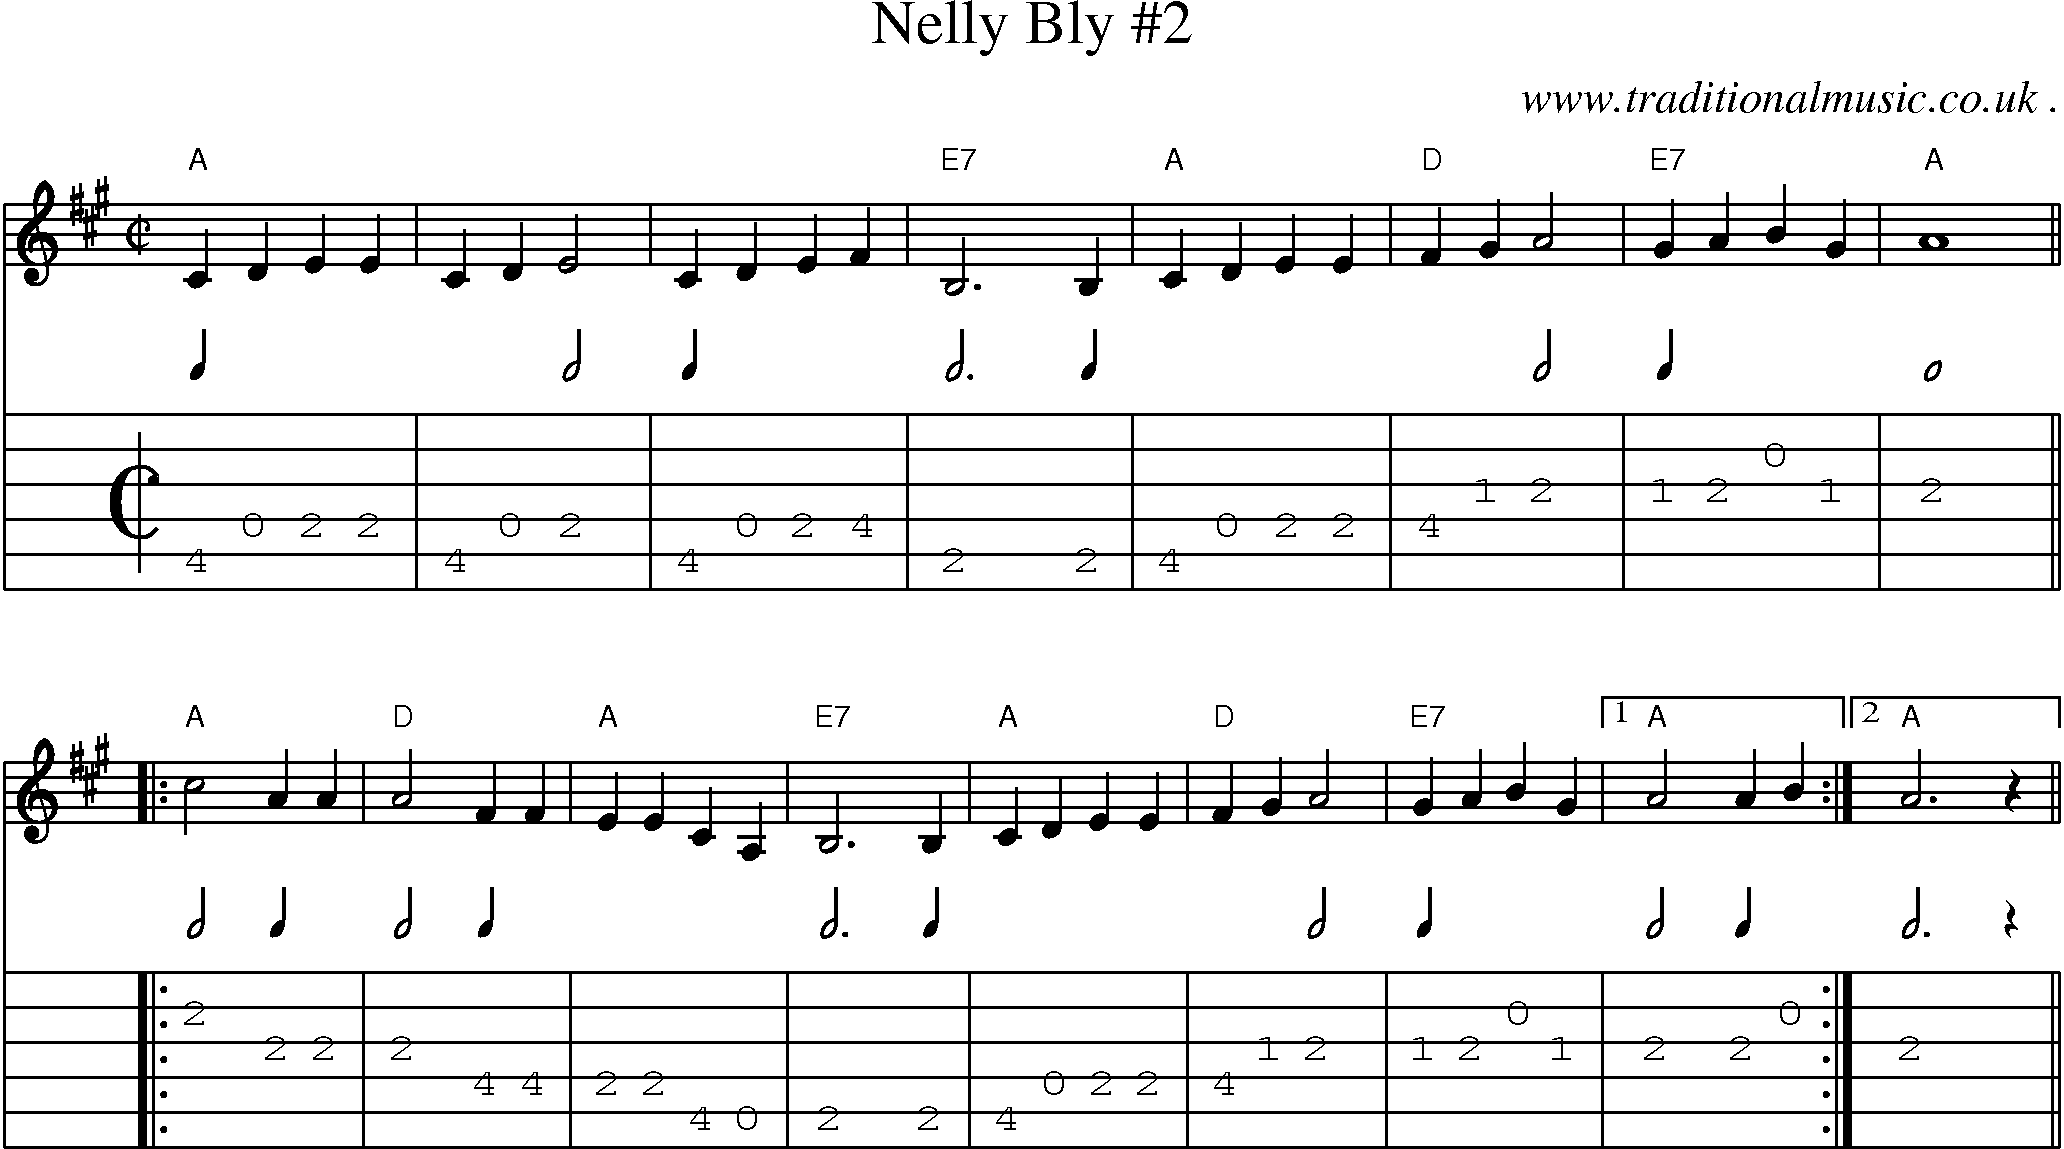 Music Score and Guitar Tabs for Nelly Bly 2